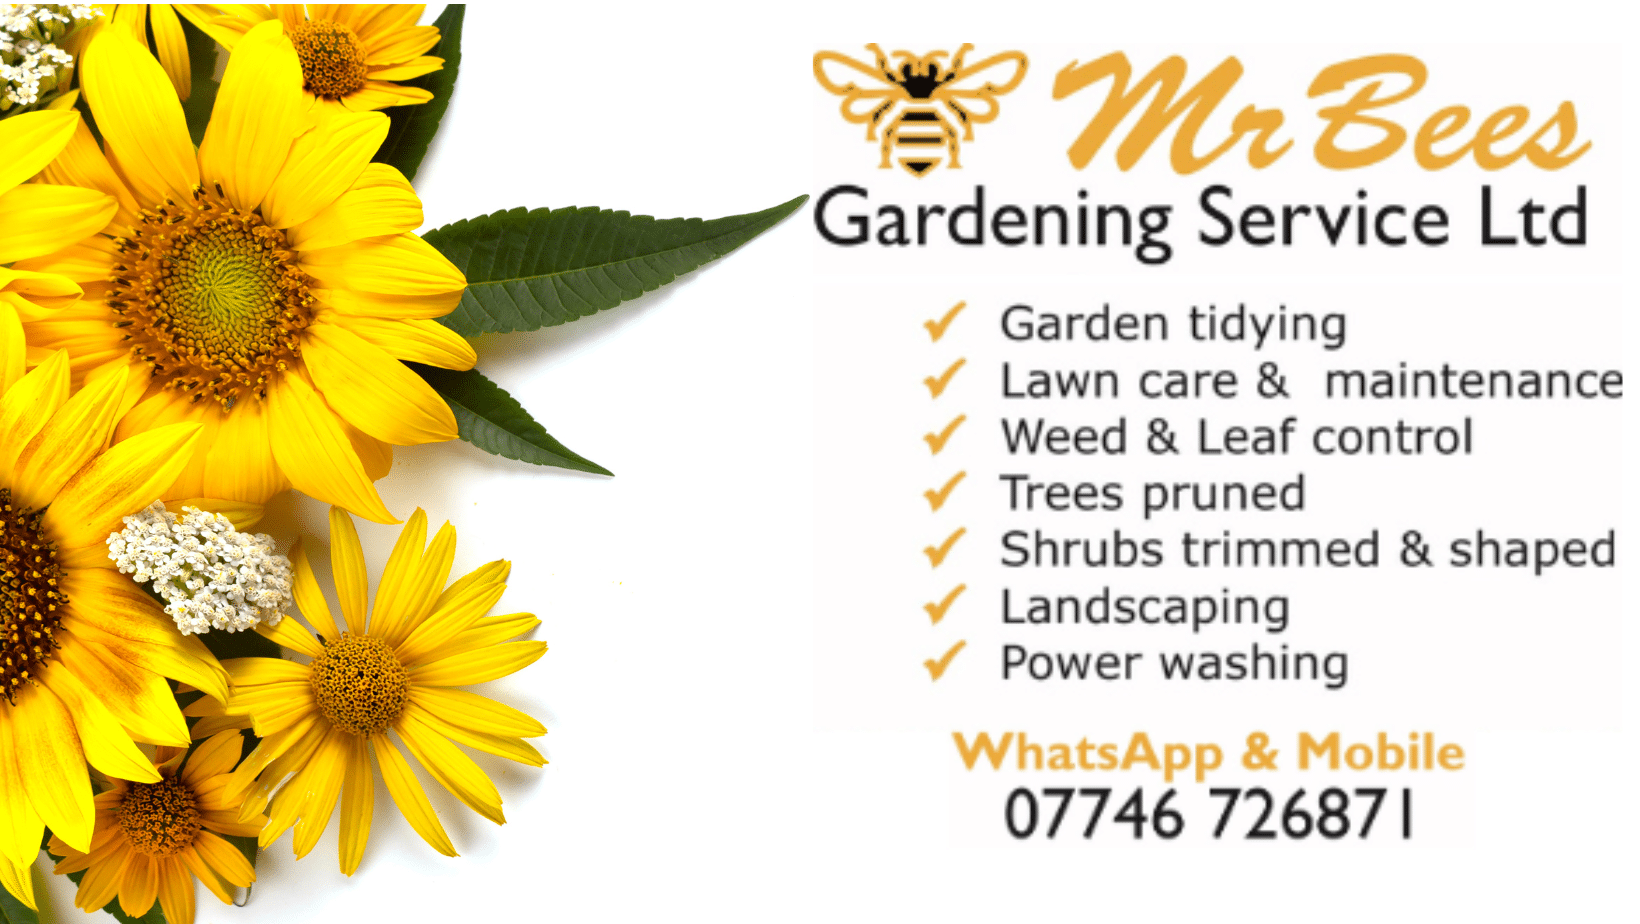 Mr BEES Gardening Service LTD - Cultivating Beauty, Naturally